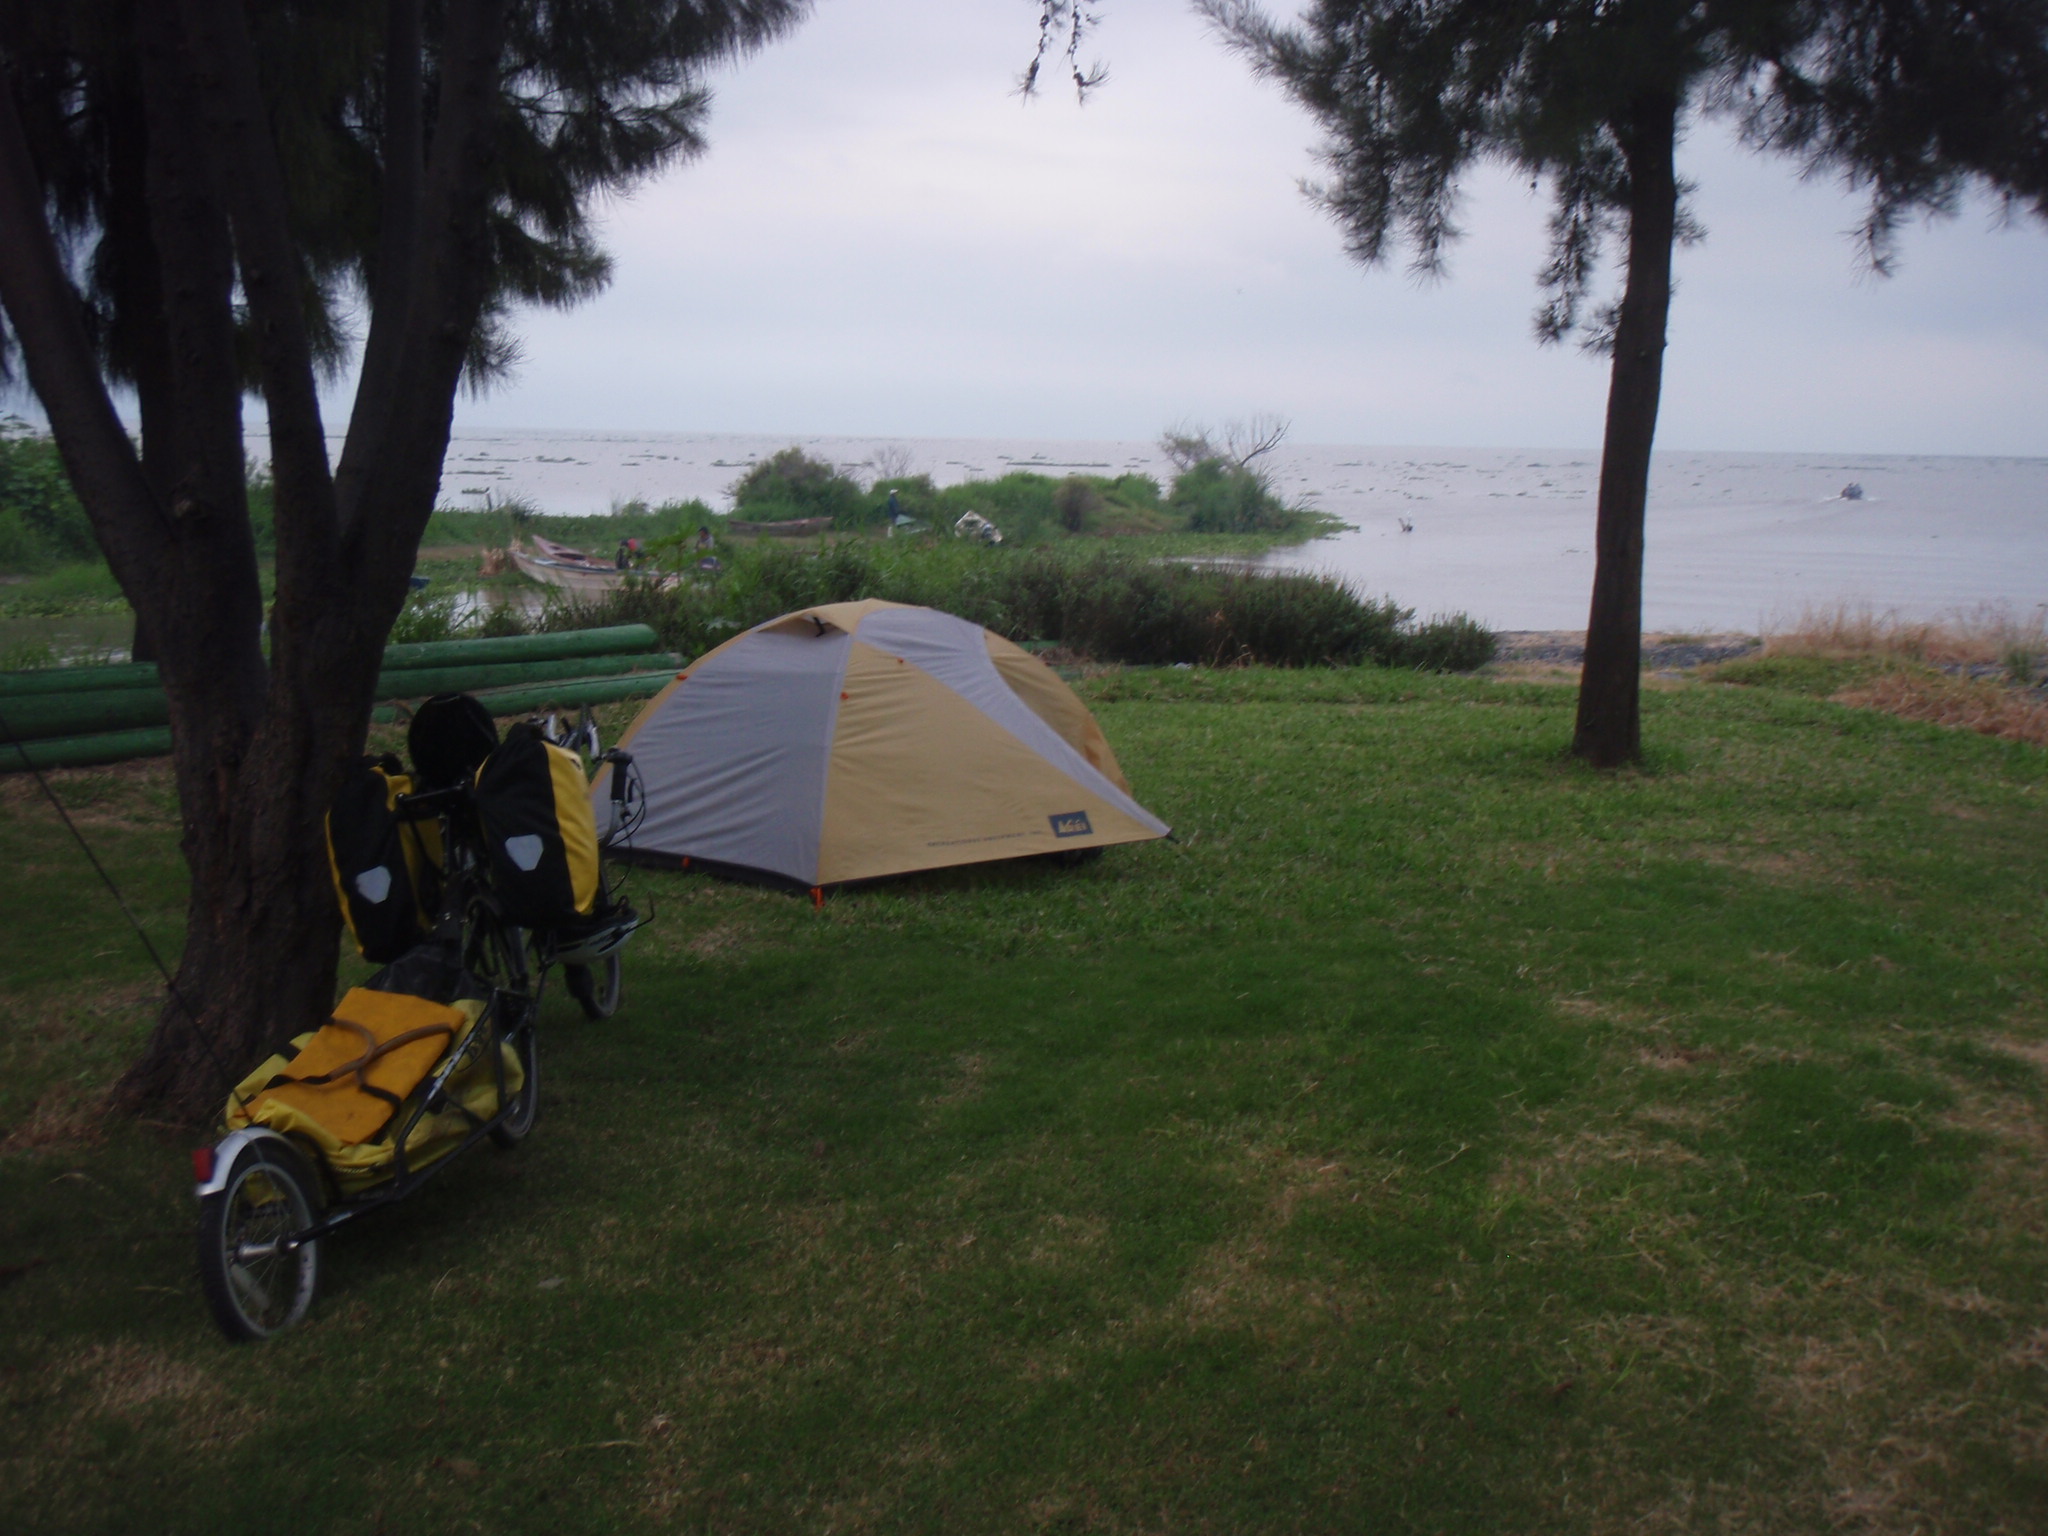 Camping right next to Lago de Chapala on the hotel premises